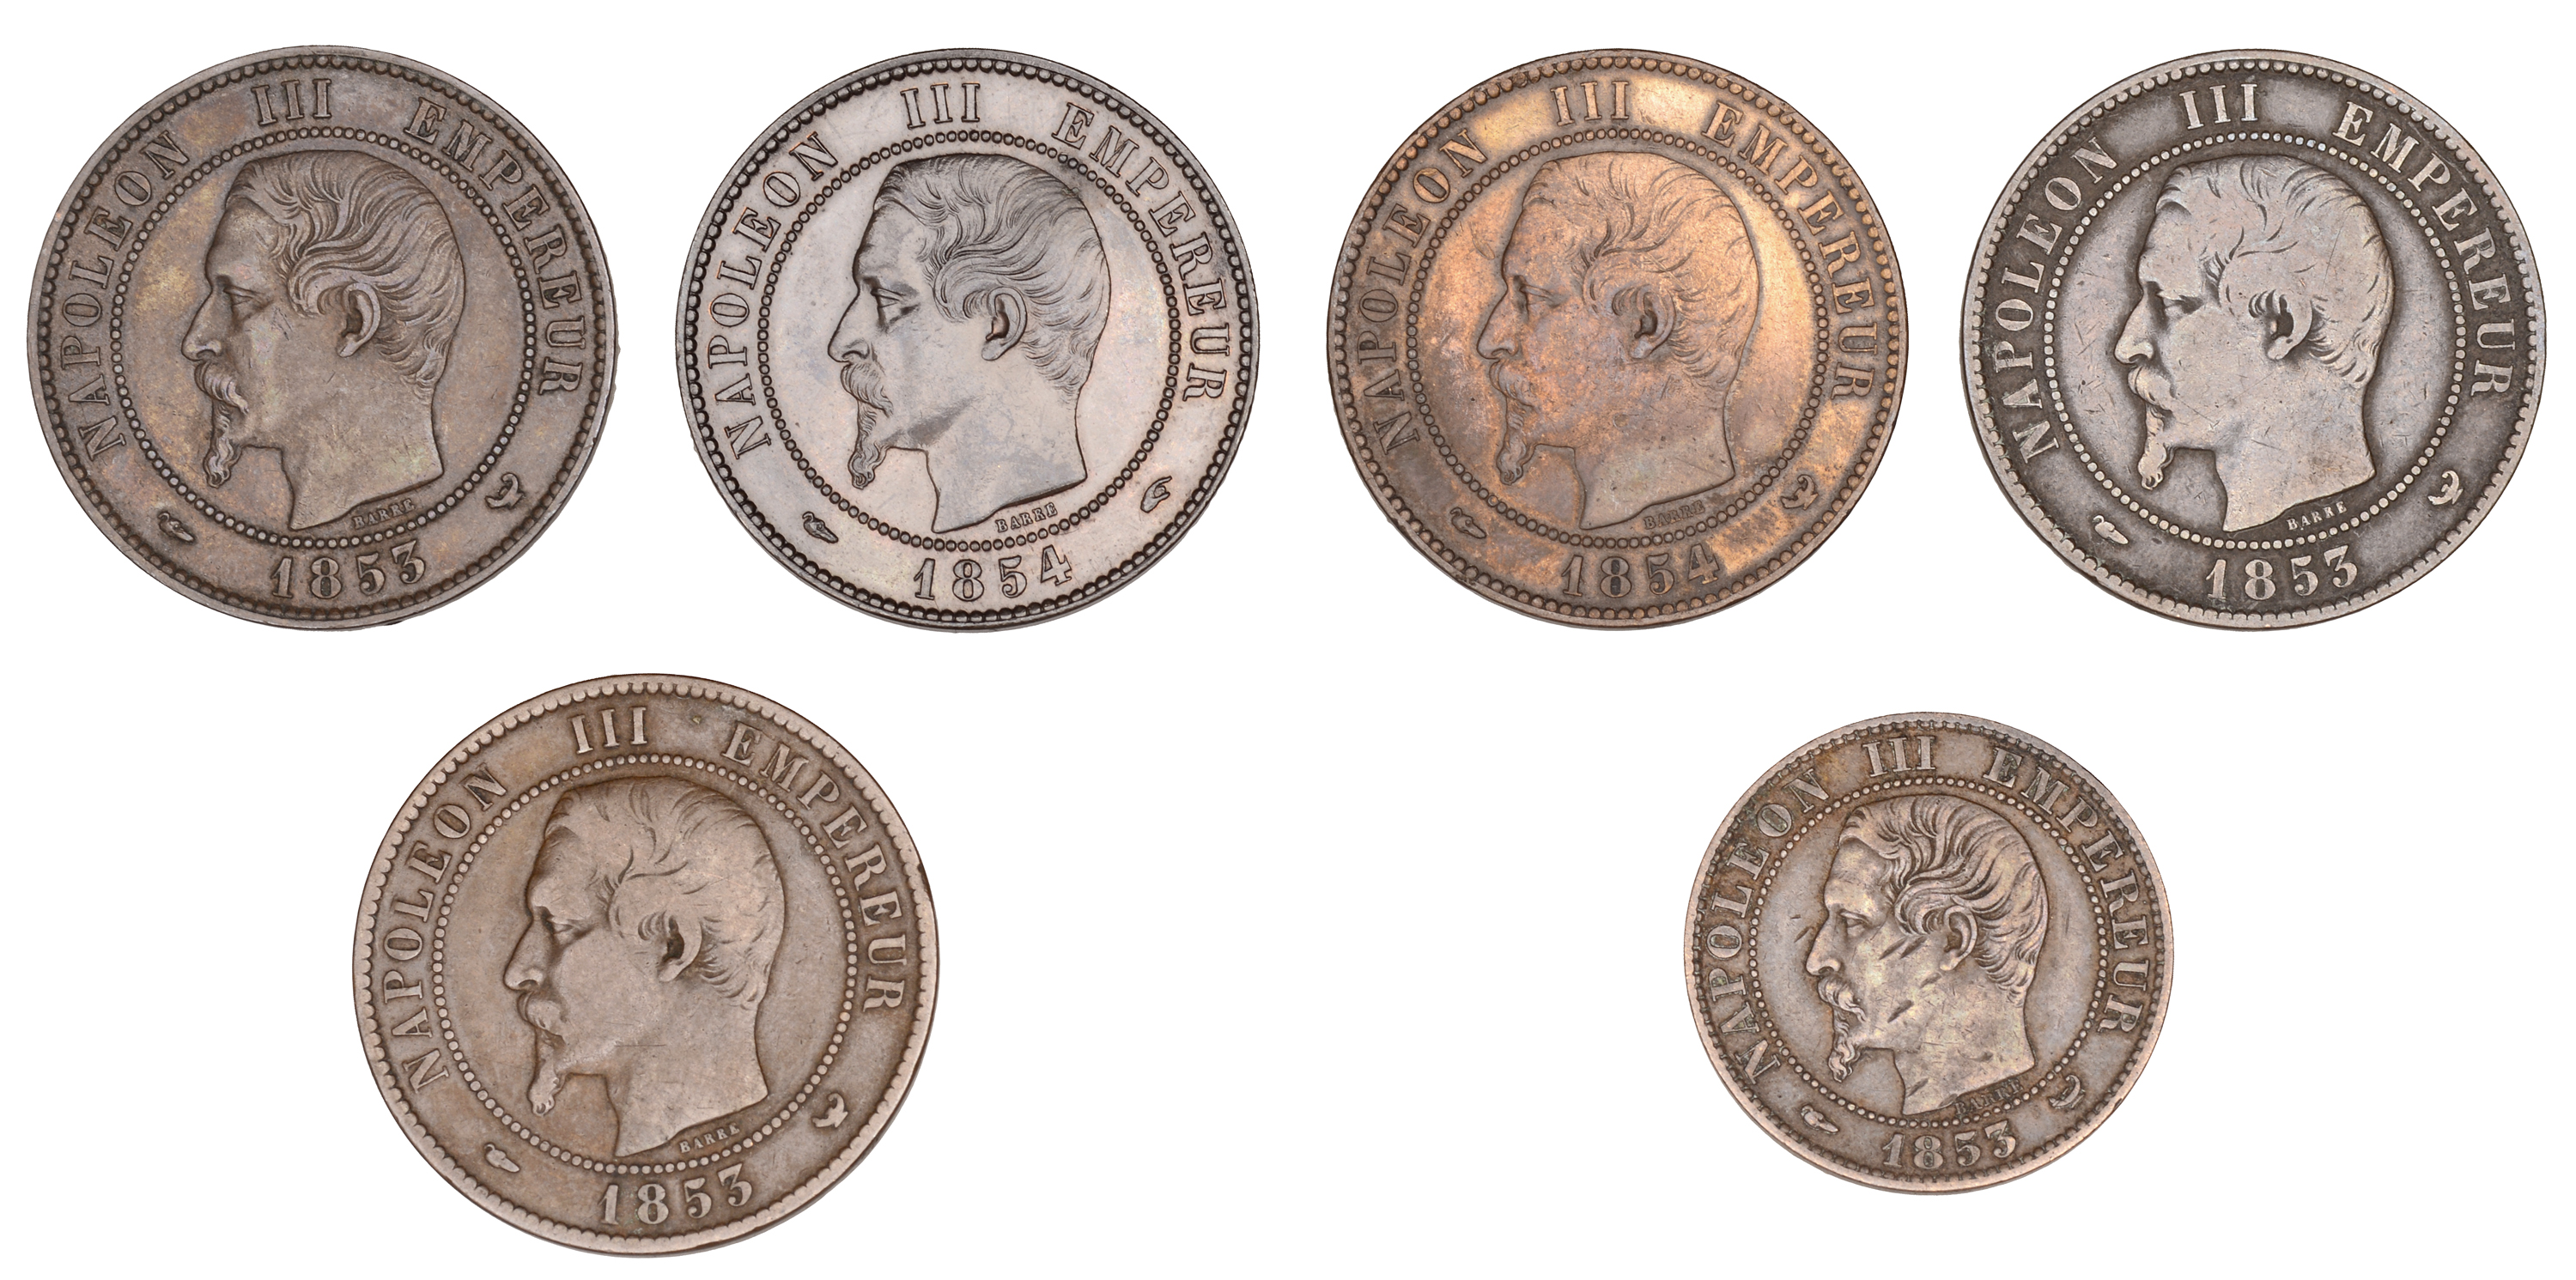 France, Napoleon III (1852-1870), Medallic 10 Centimes (5): Visit to Lille, 1853 (3) (VG 336...